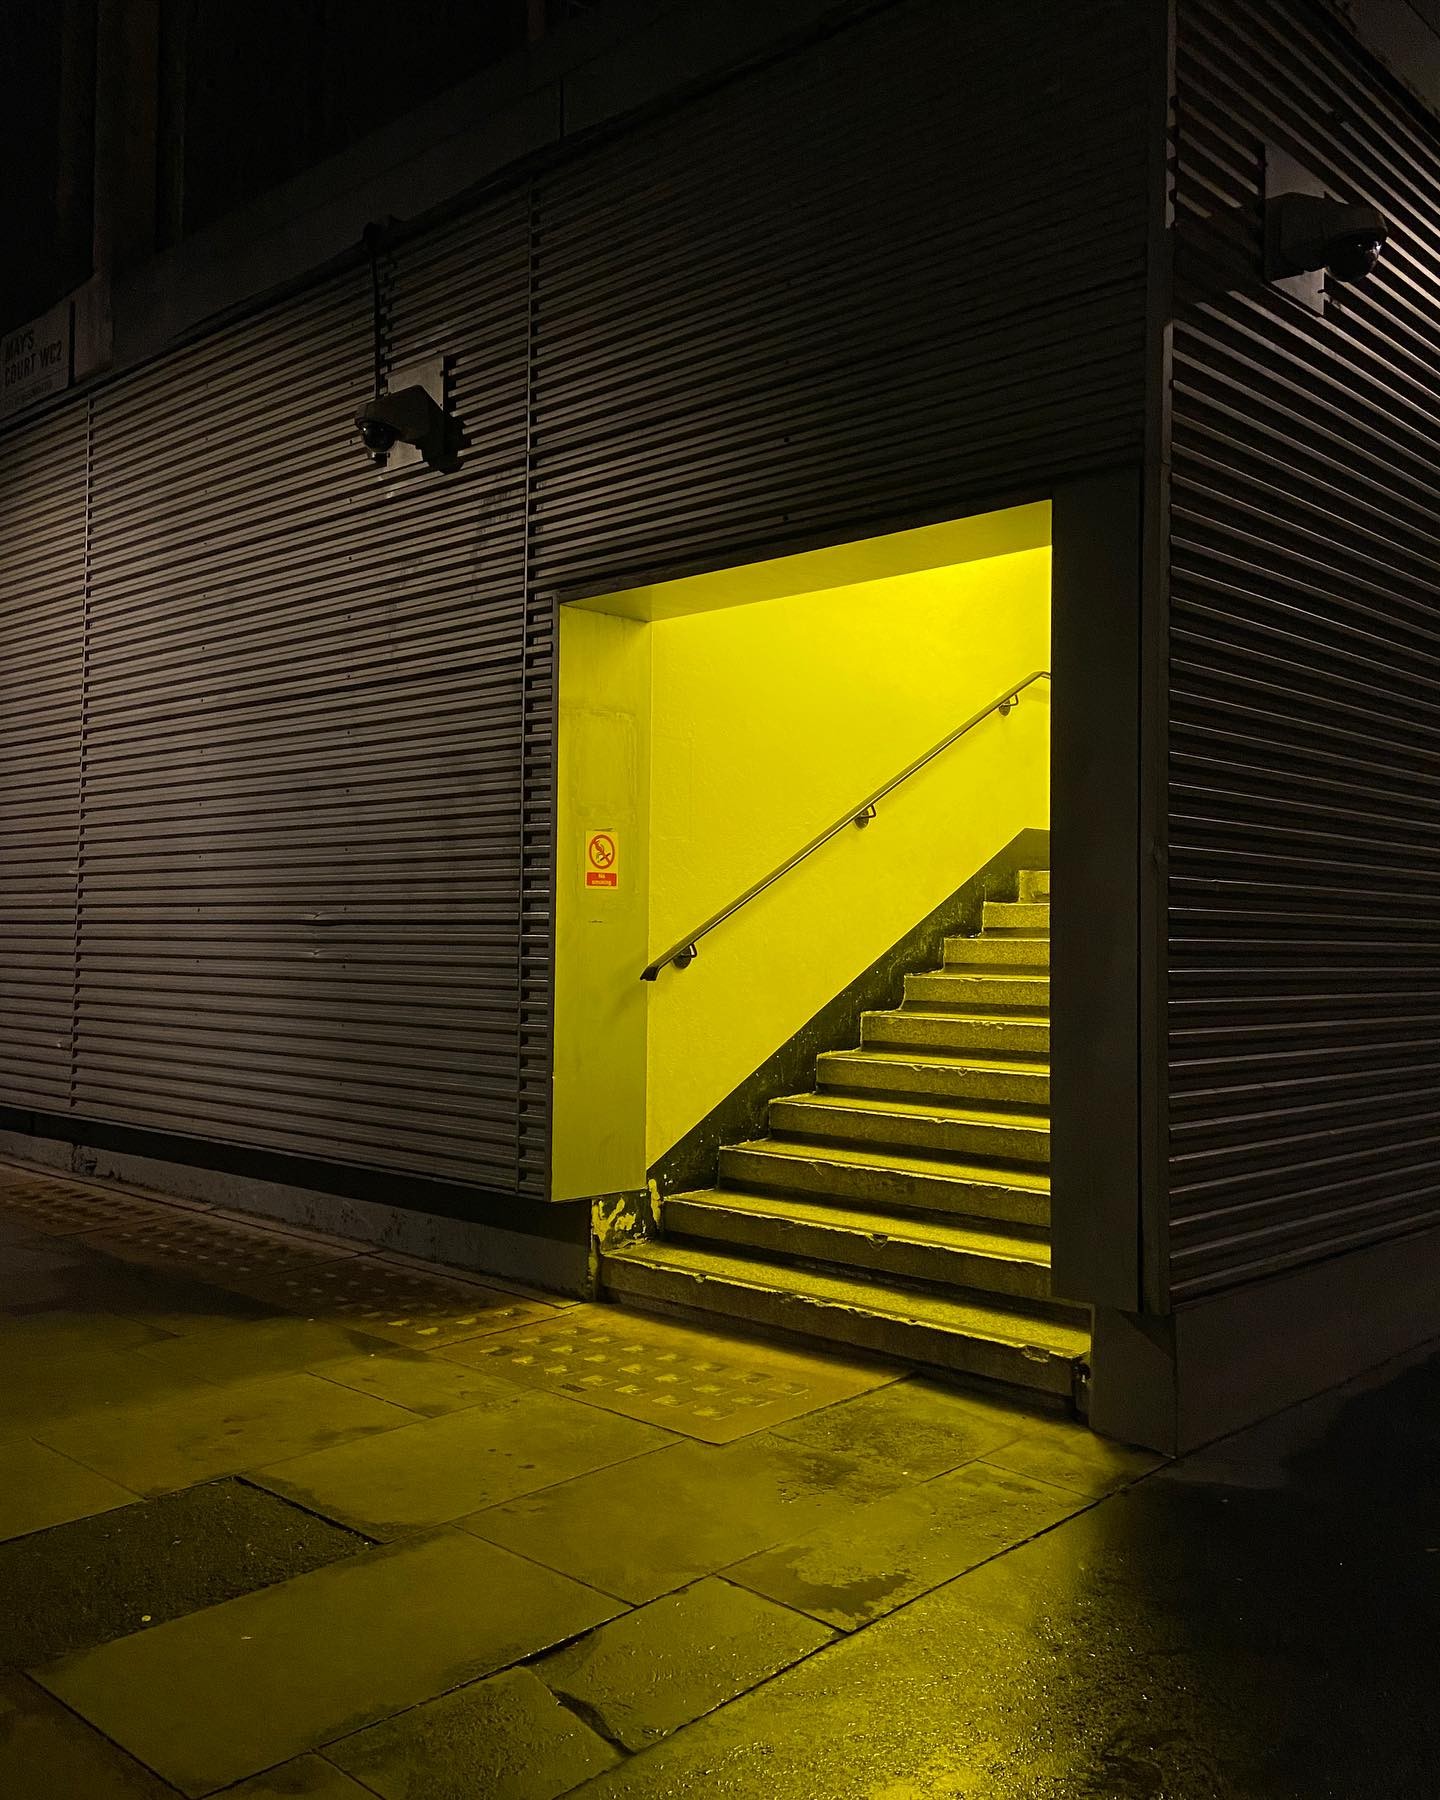 yellow glow spills out of parking structure after dark, stairs rising internally